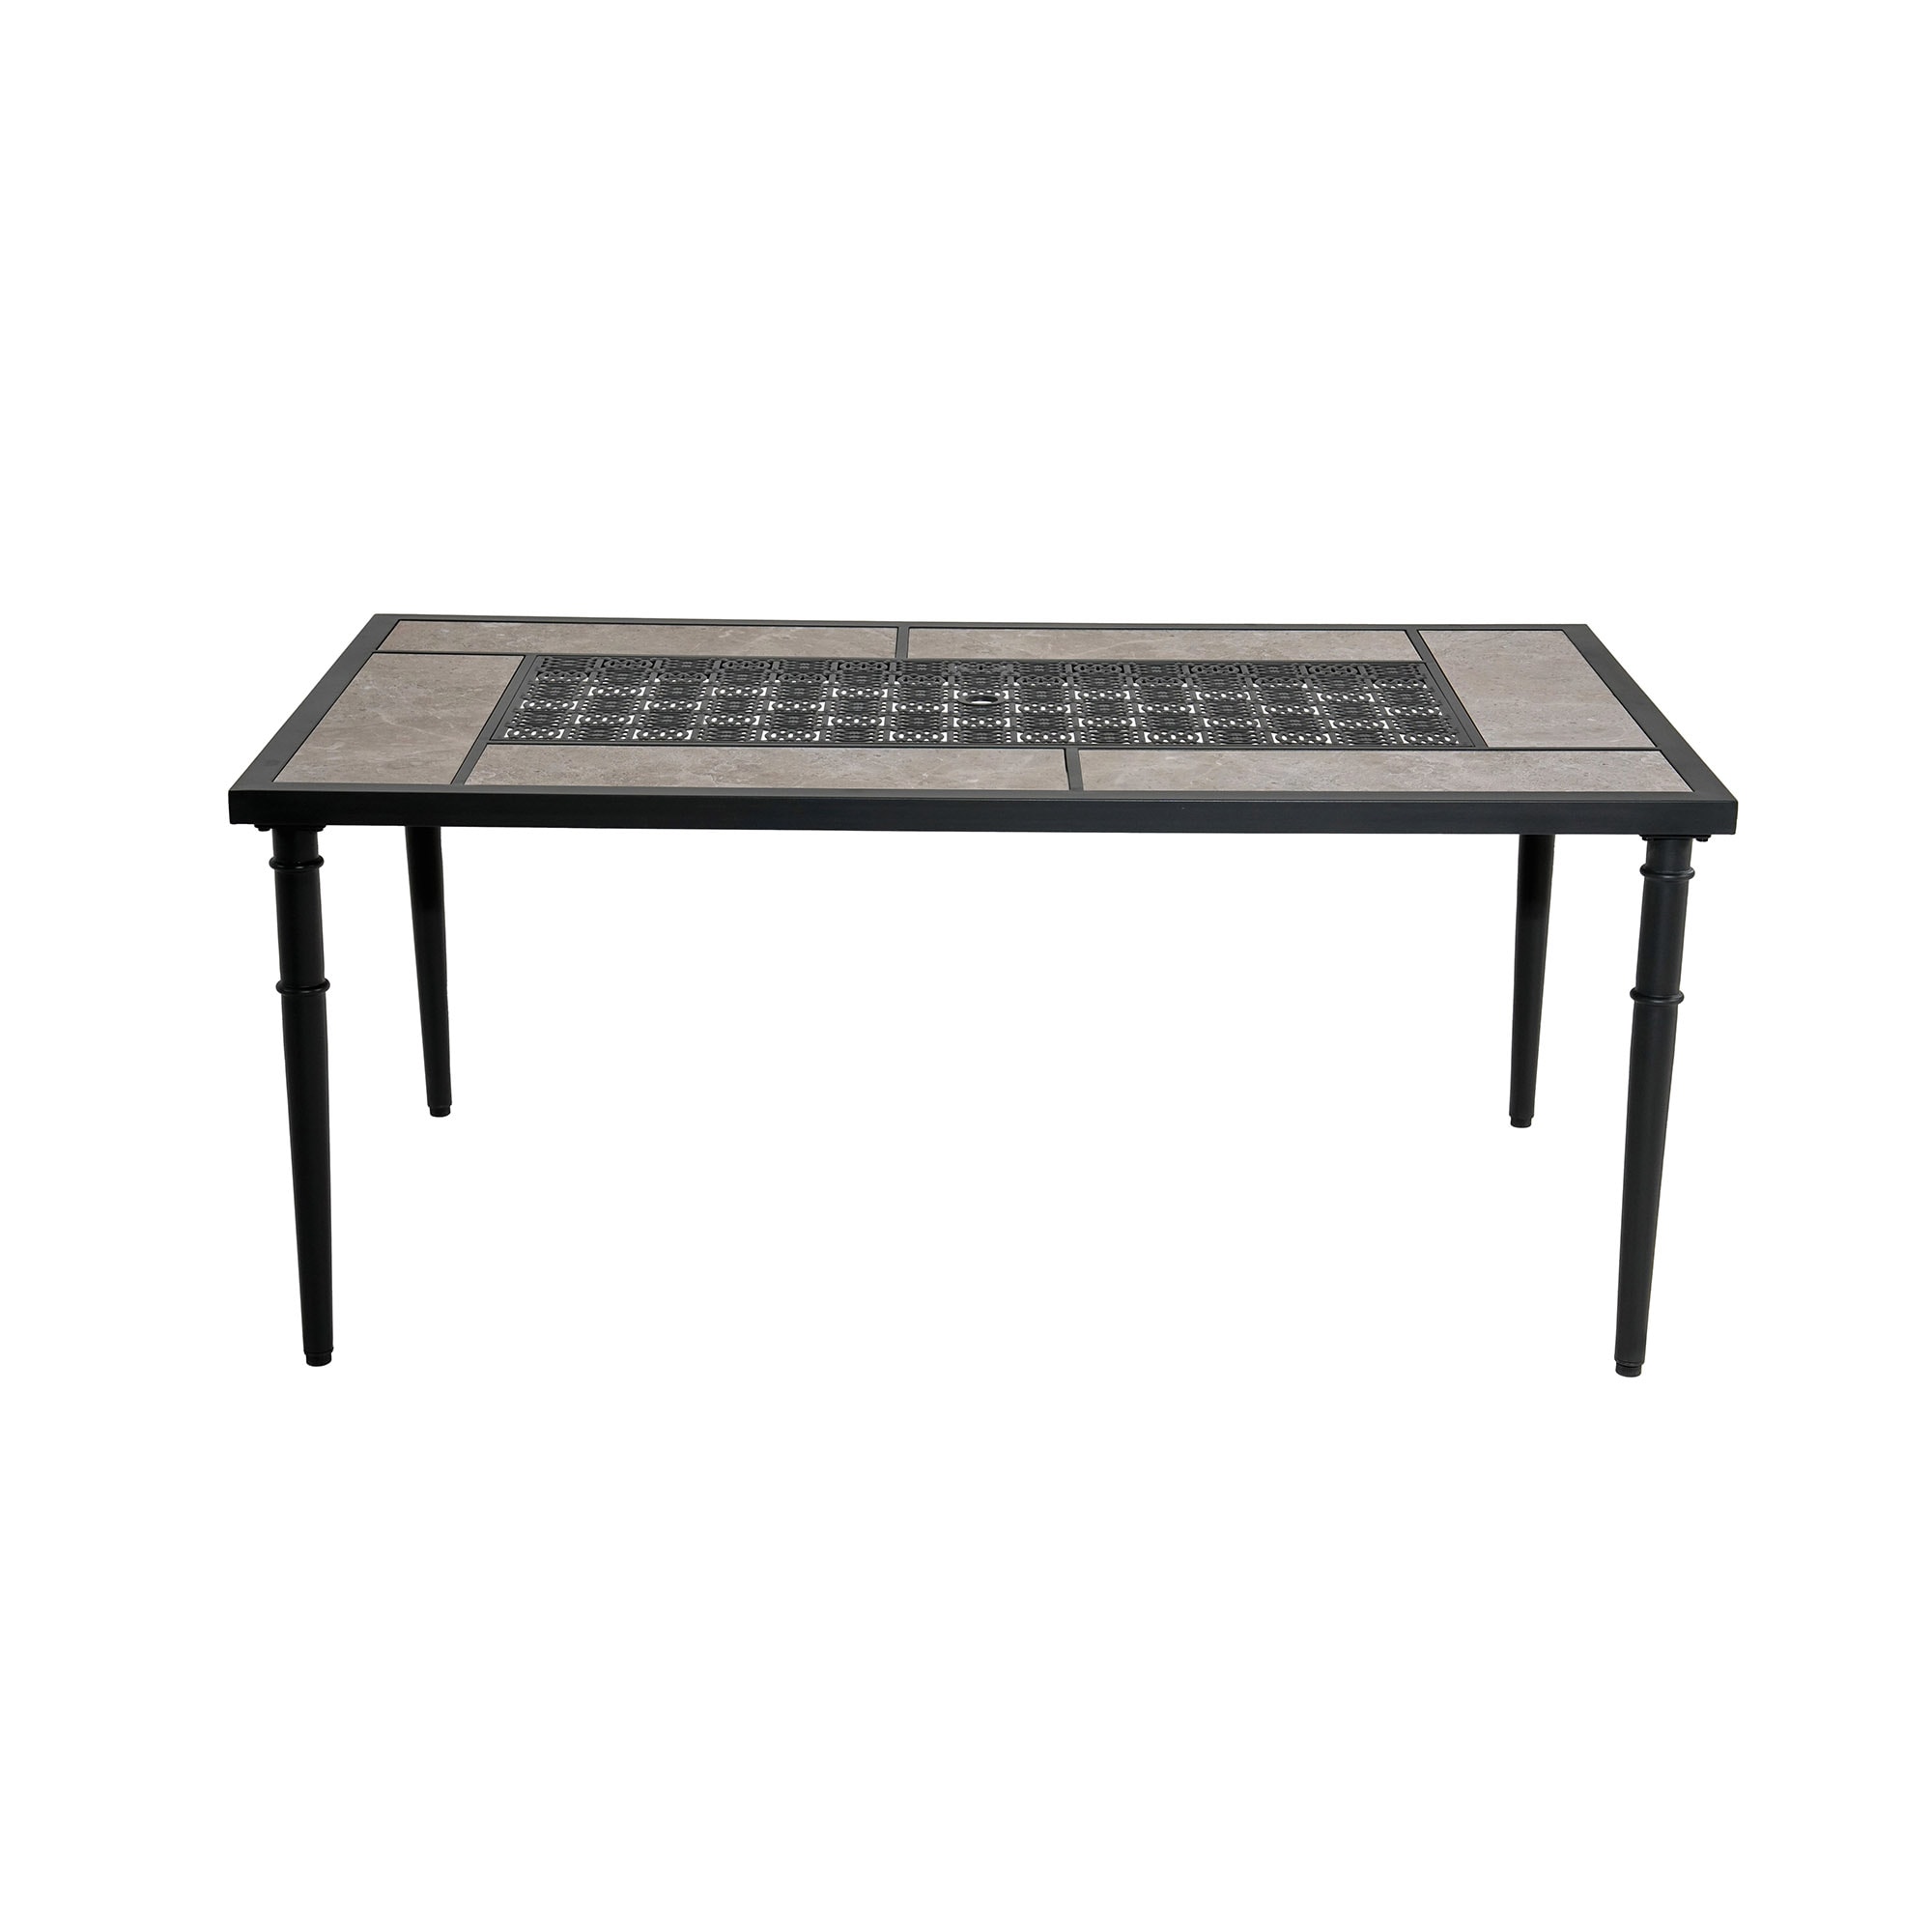 Allen + Roth Thomas Lake Rectangle Outdoor Dining Table 39-in W x 67-in L with Umbrella Hole | LOS23006-DT67391